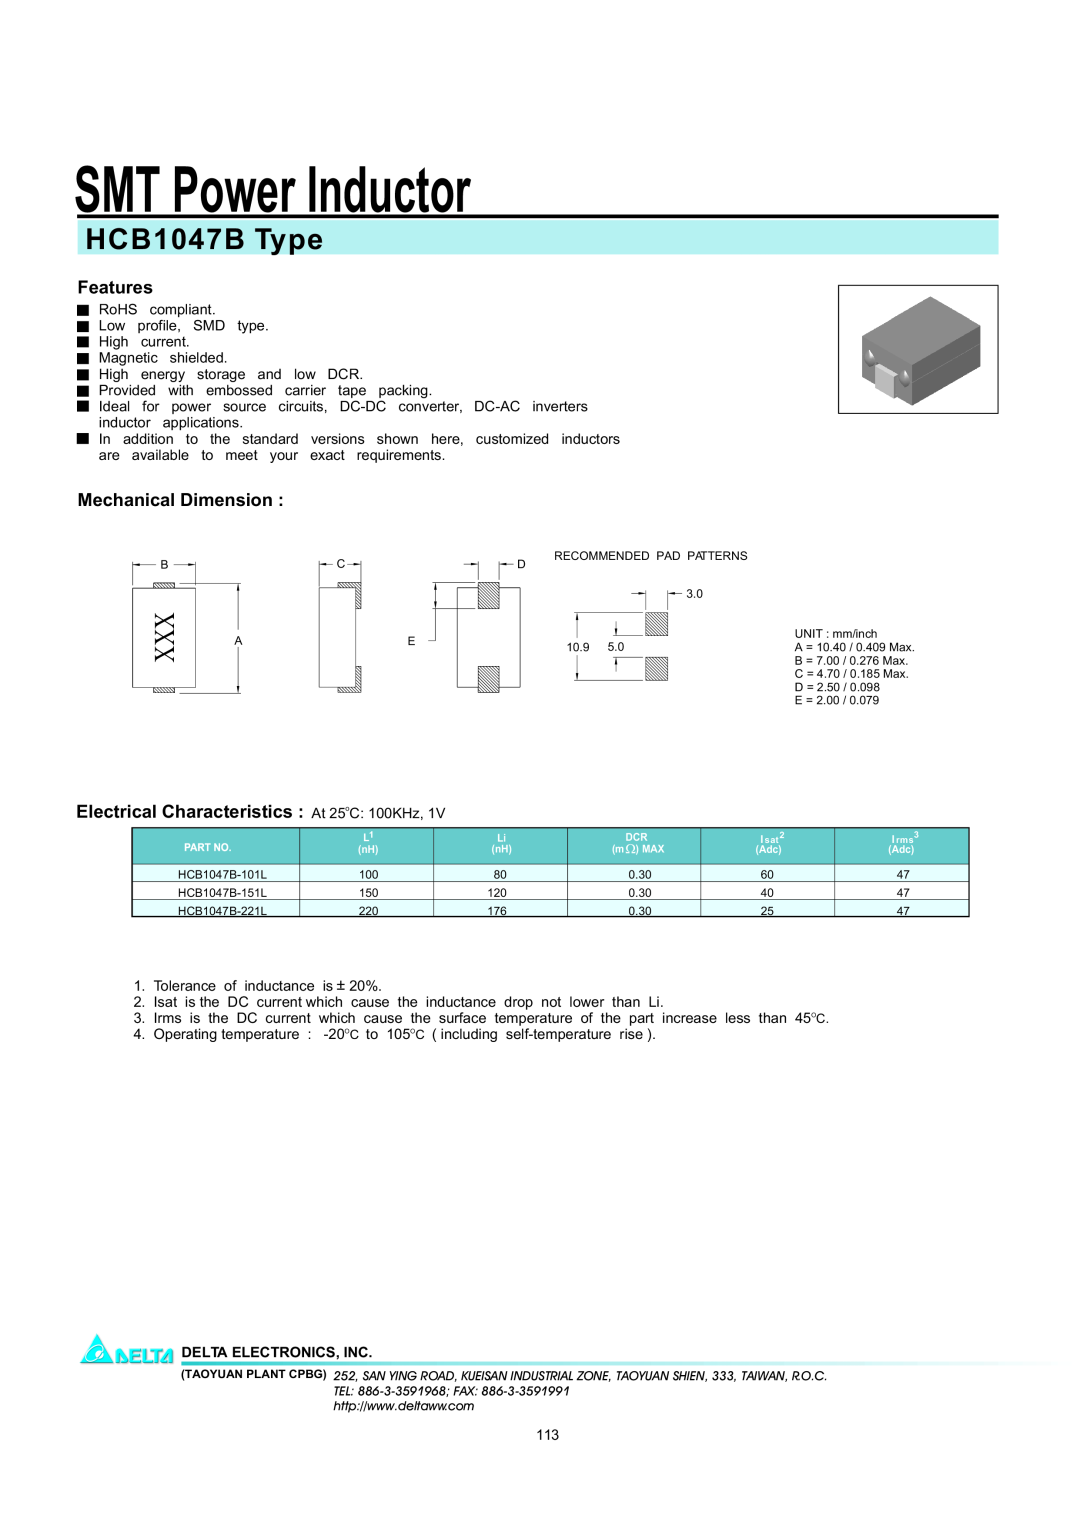 Delta Electronics manual SMT Power Inductor, HCB1047B Type, Features, Mechanical Dimension, Delta Electronics, Inc 